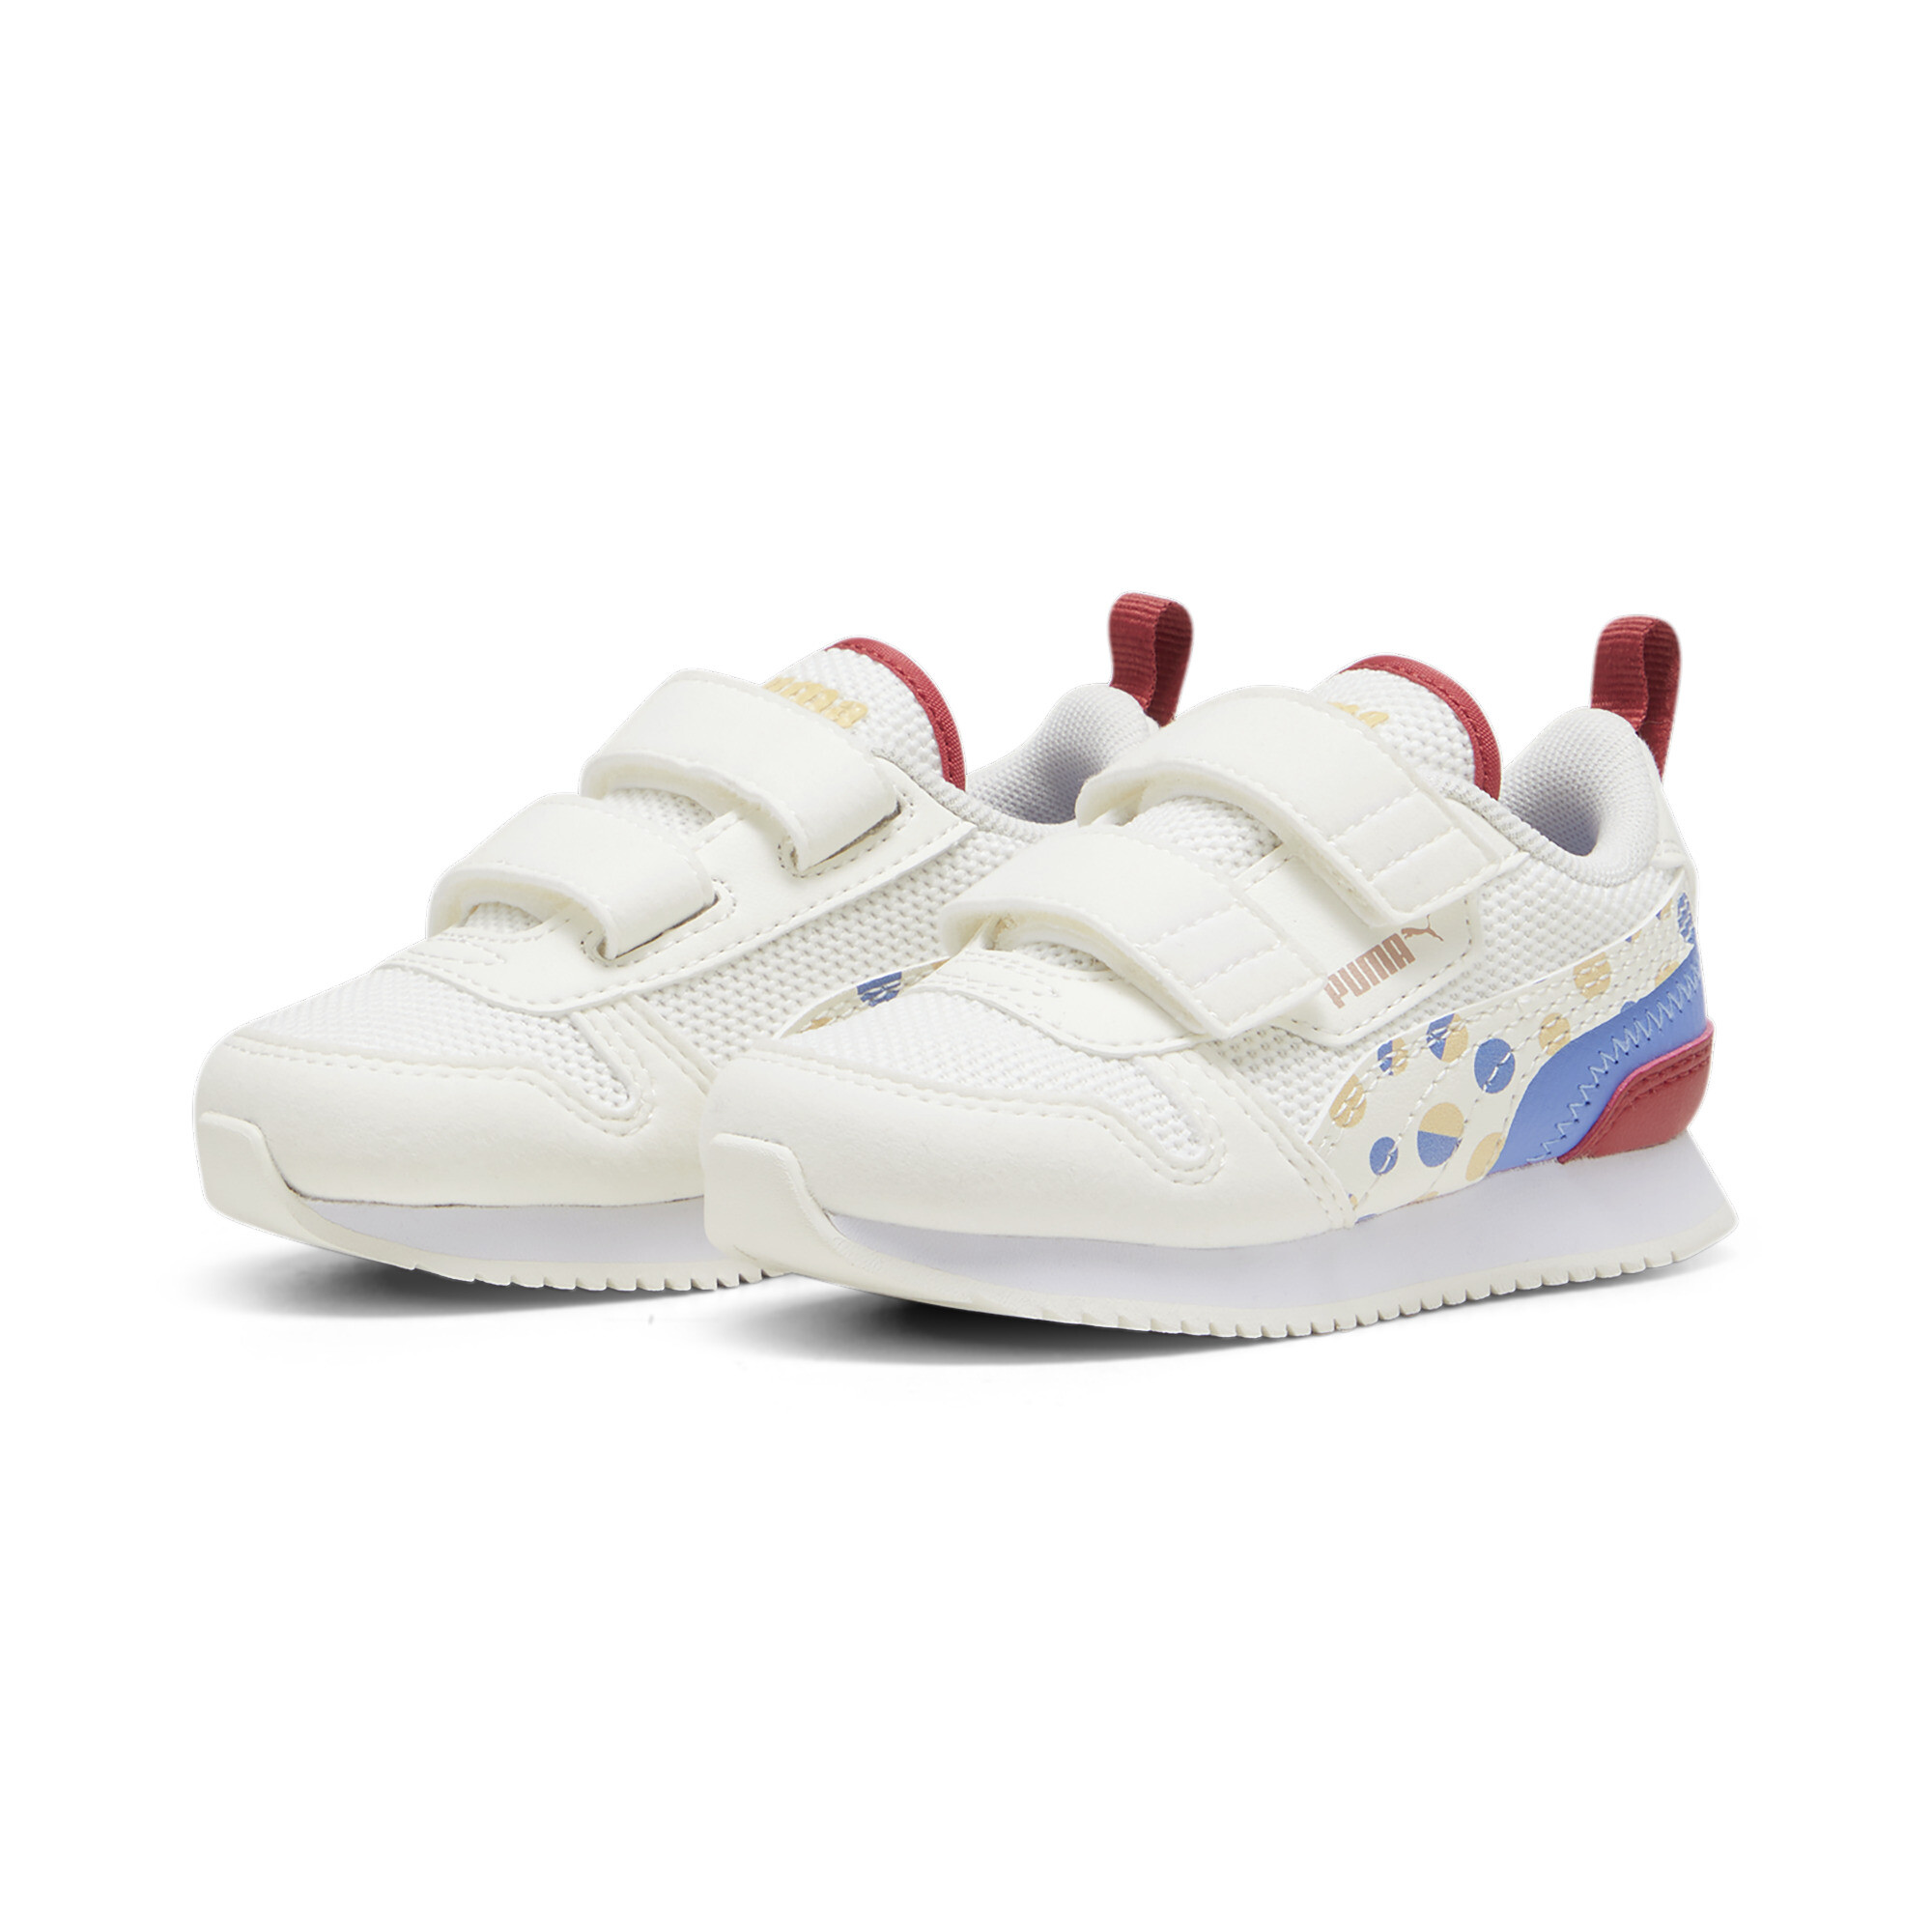 Puma R78 Summer Camp Toddlers' Sneakers, White, Size 21, Shoes